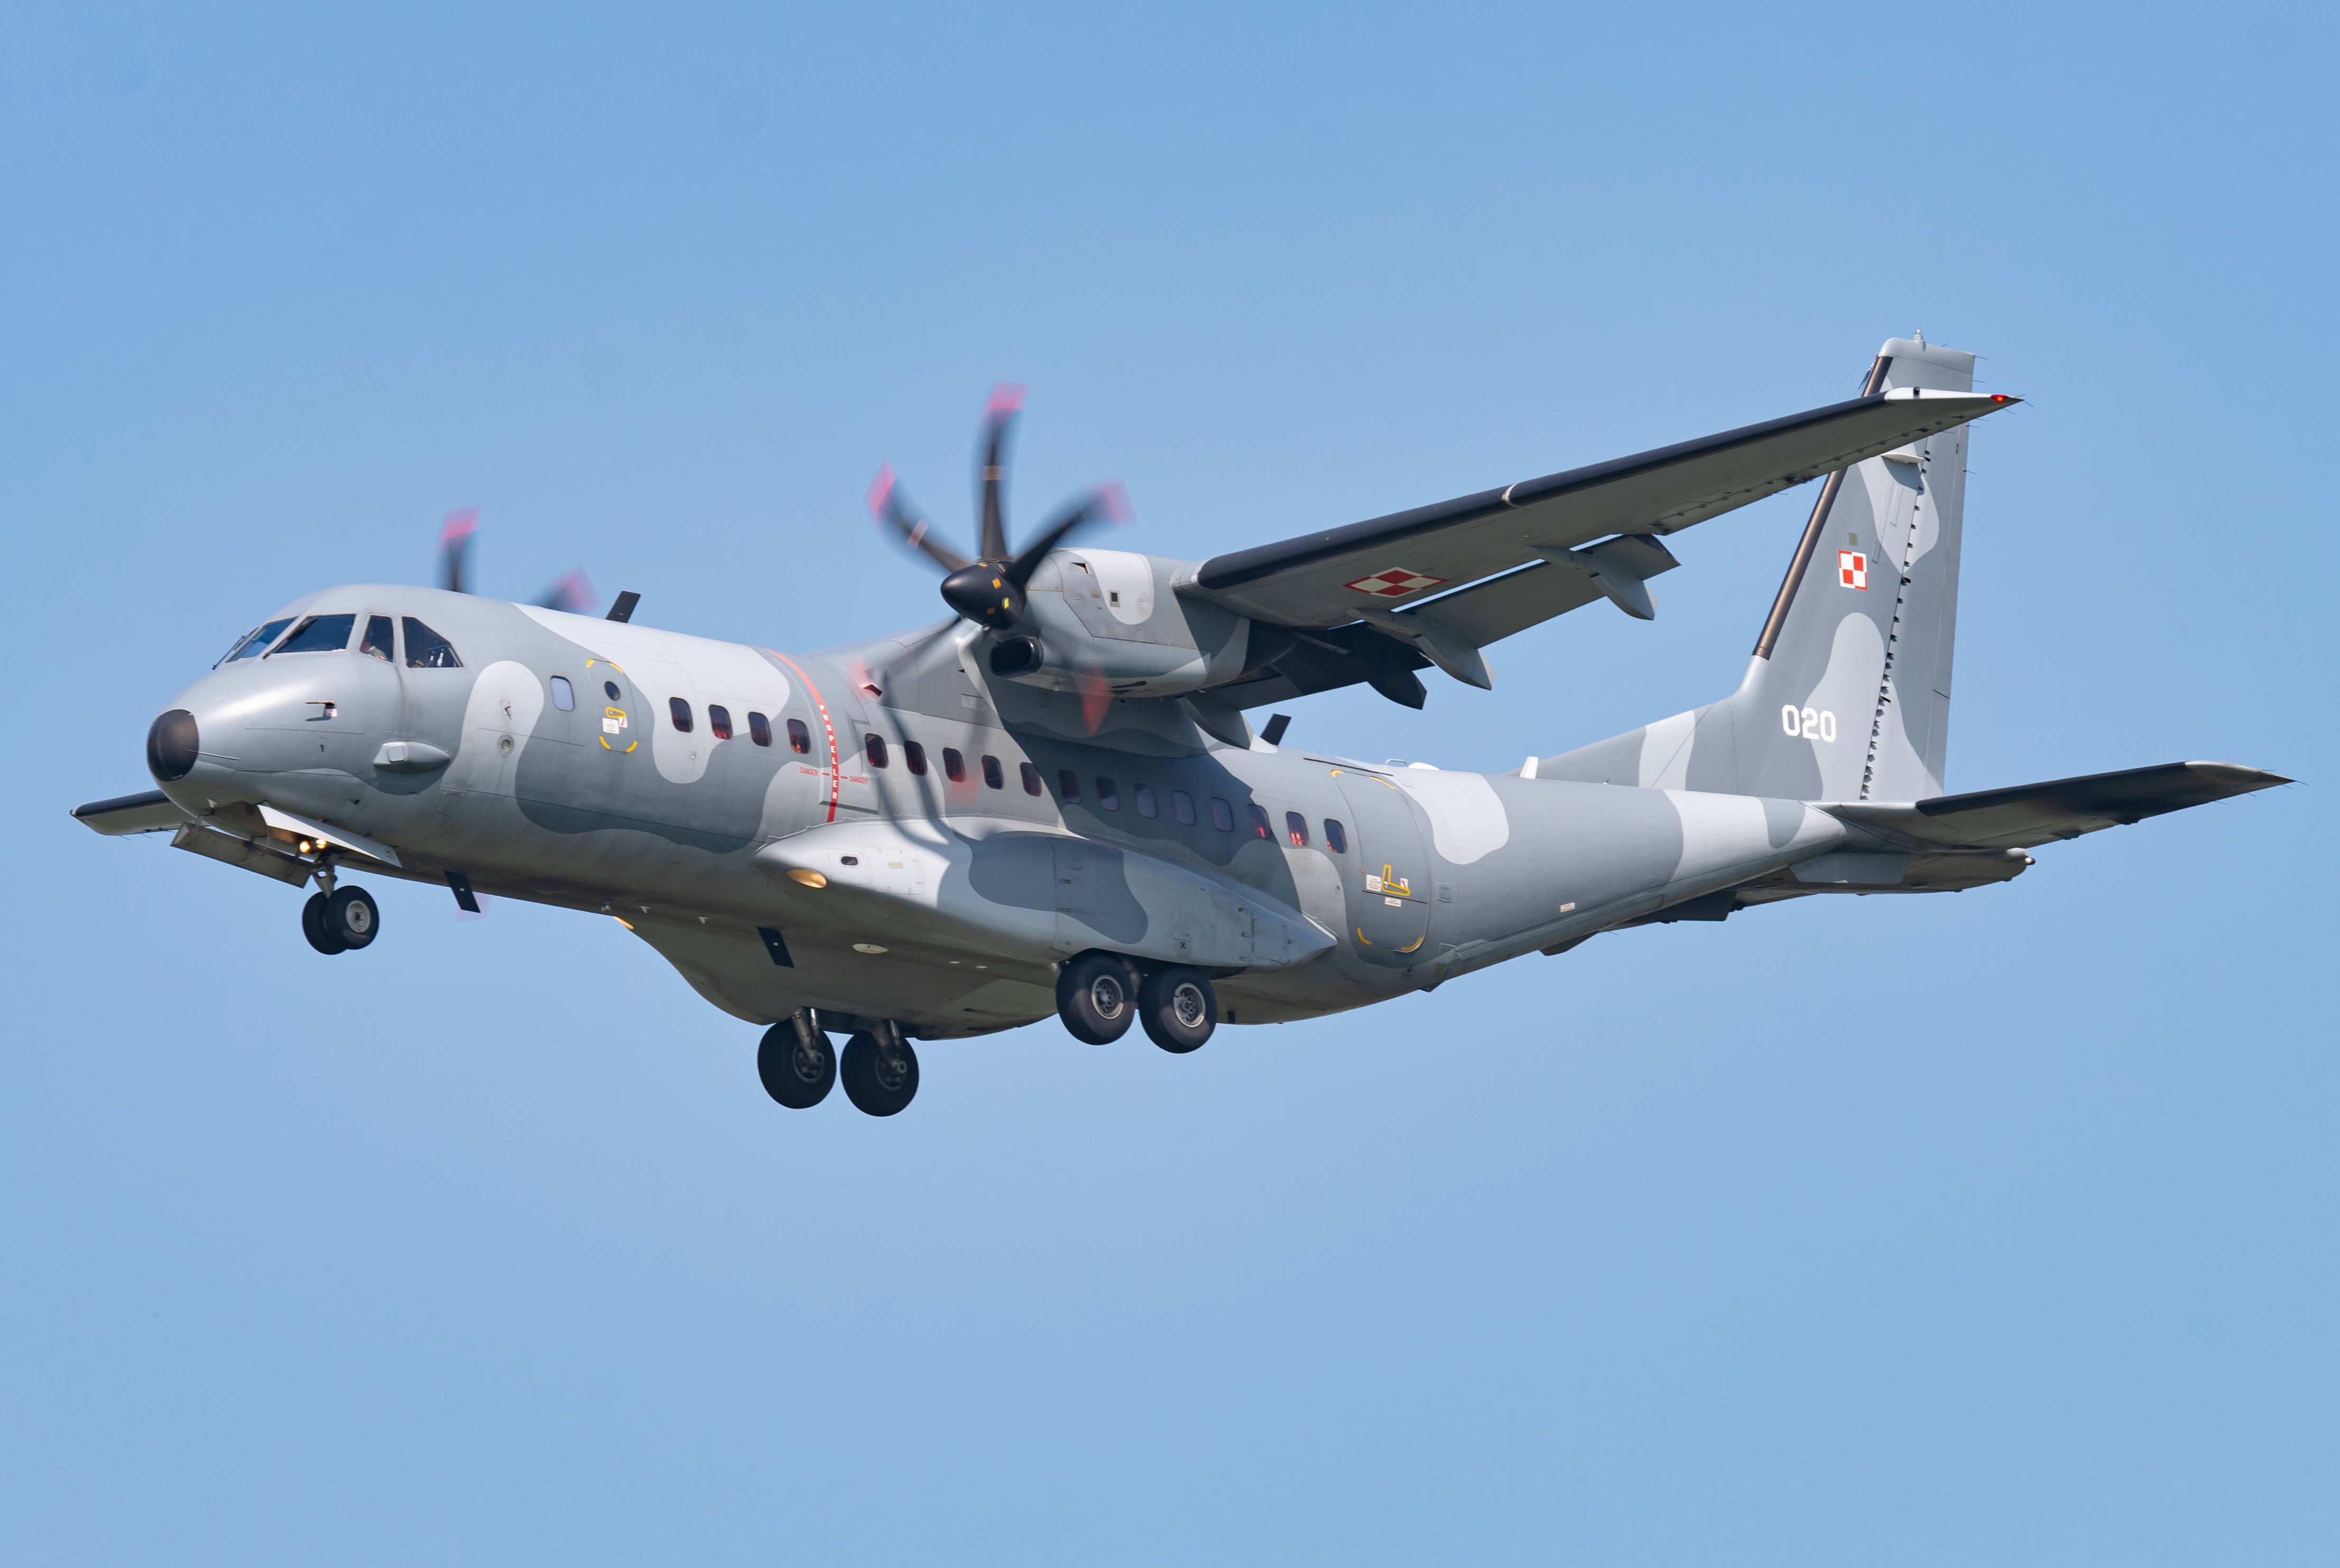 Angola has received its first Airbus C295 military transport aircraft